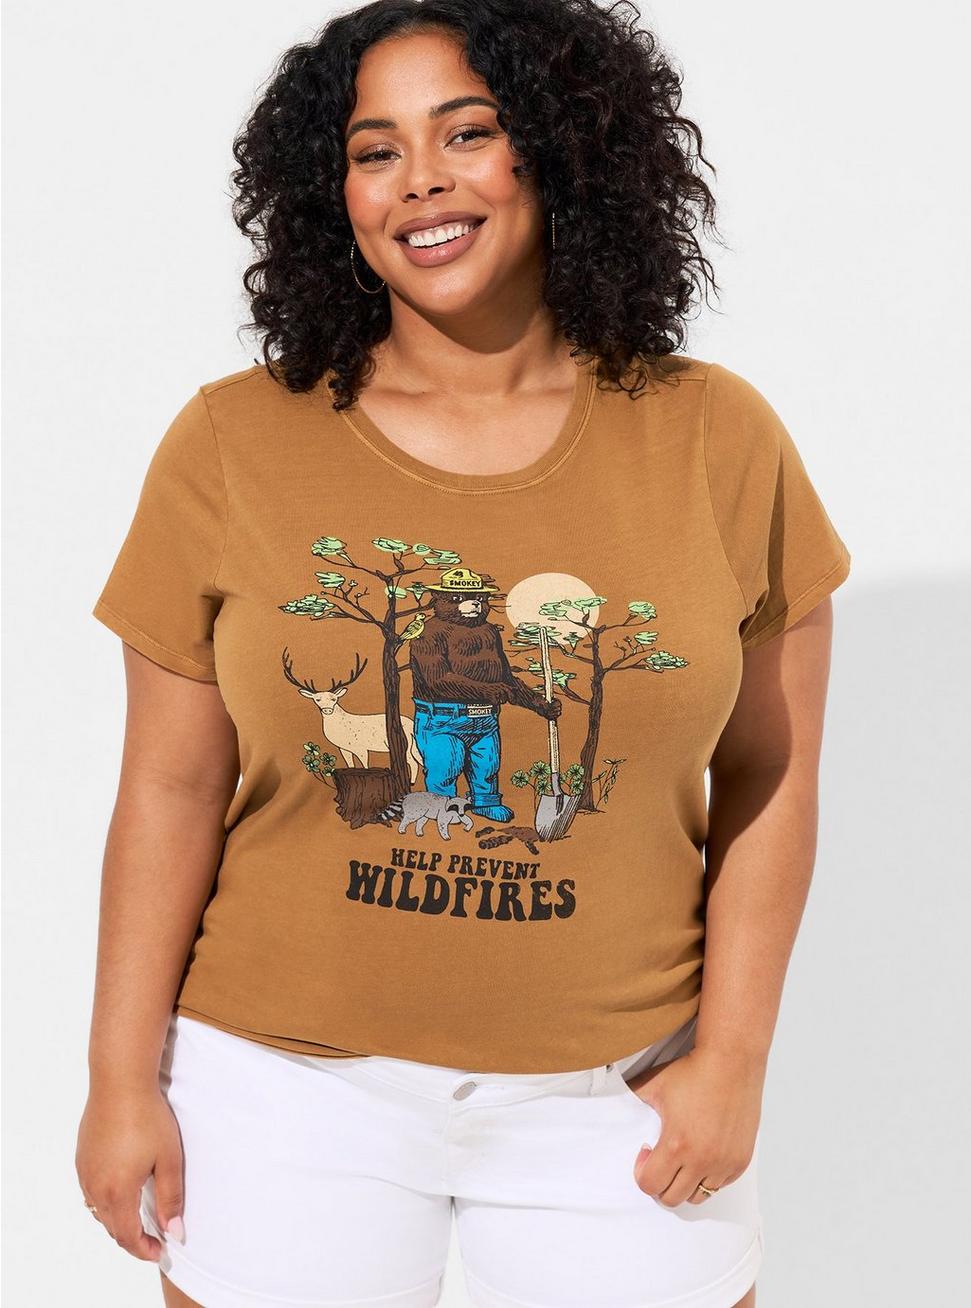 Plus Size Smokey The Bear Classic Fit Cotton Crew Tee, TOBACCO BROWN, hi-res